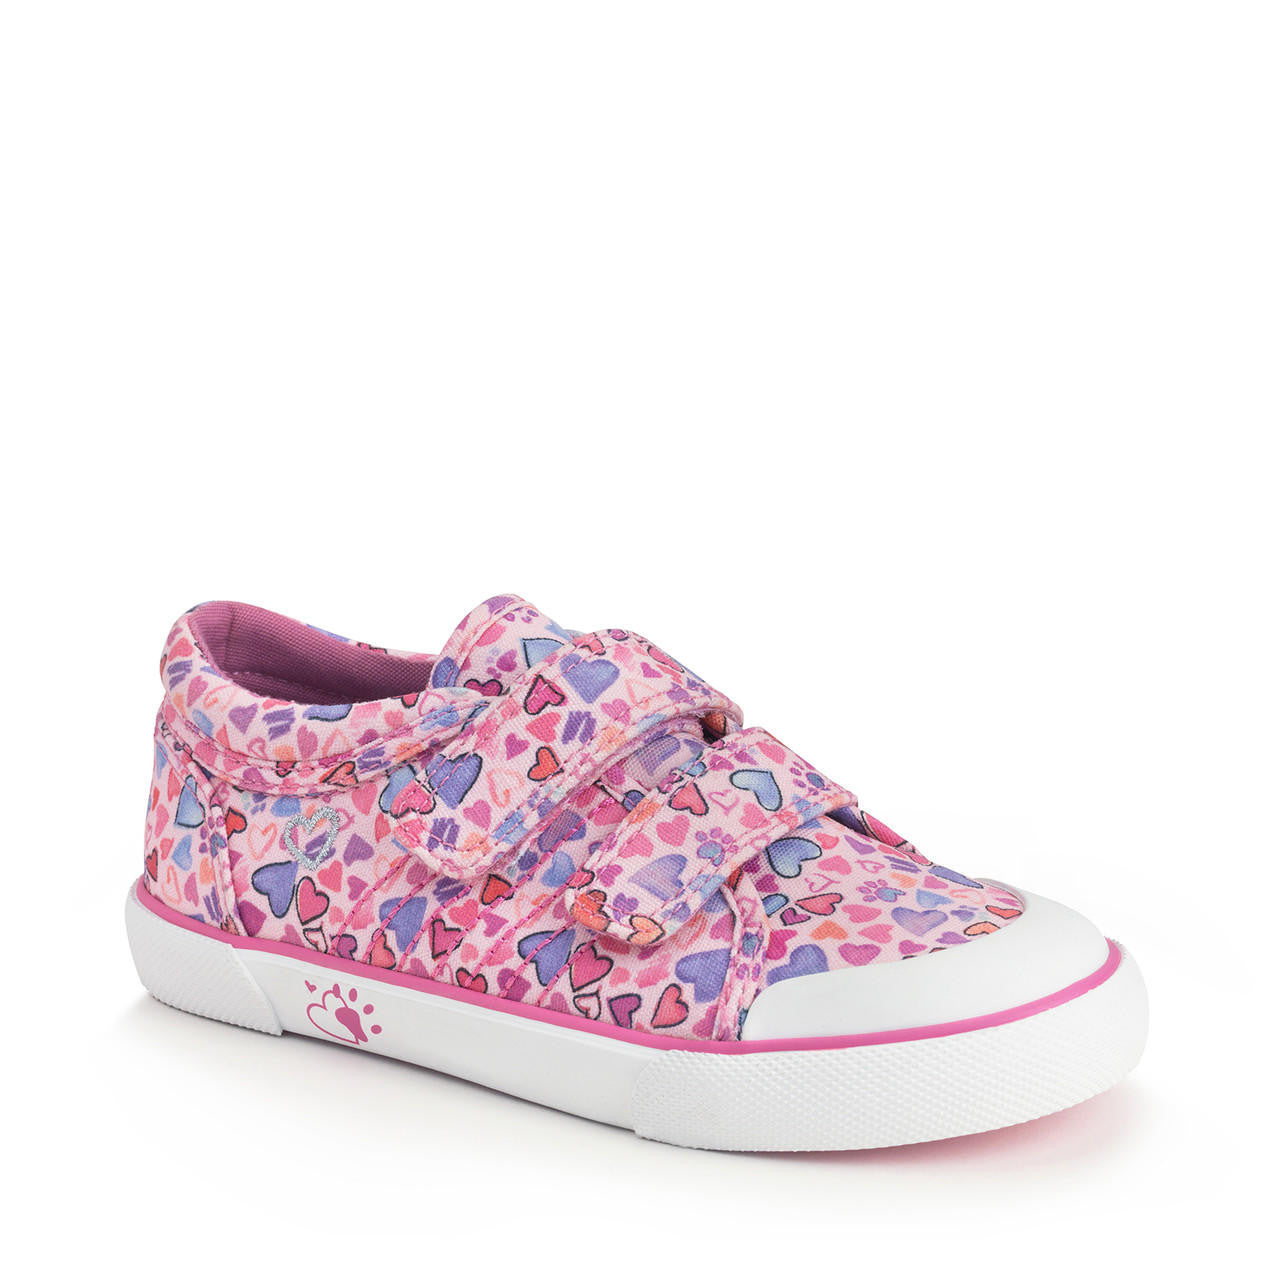 StartRite LOVEHEART Canvas Shoes (Pink) 25-30